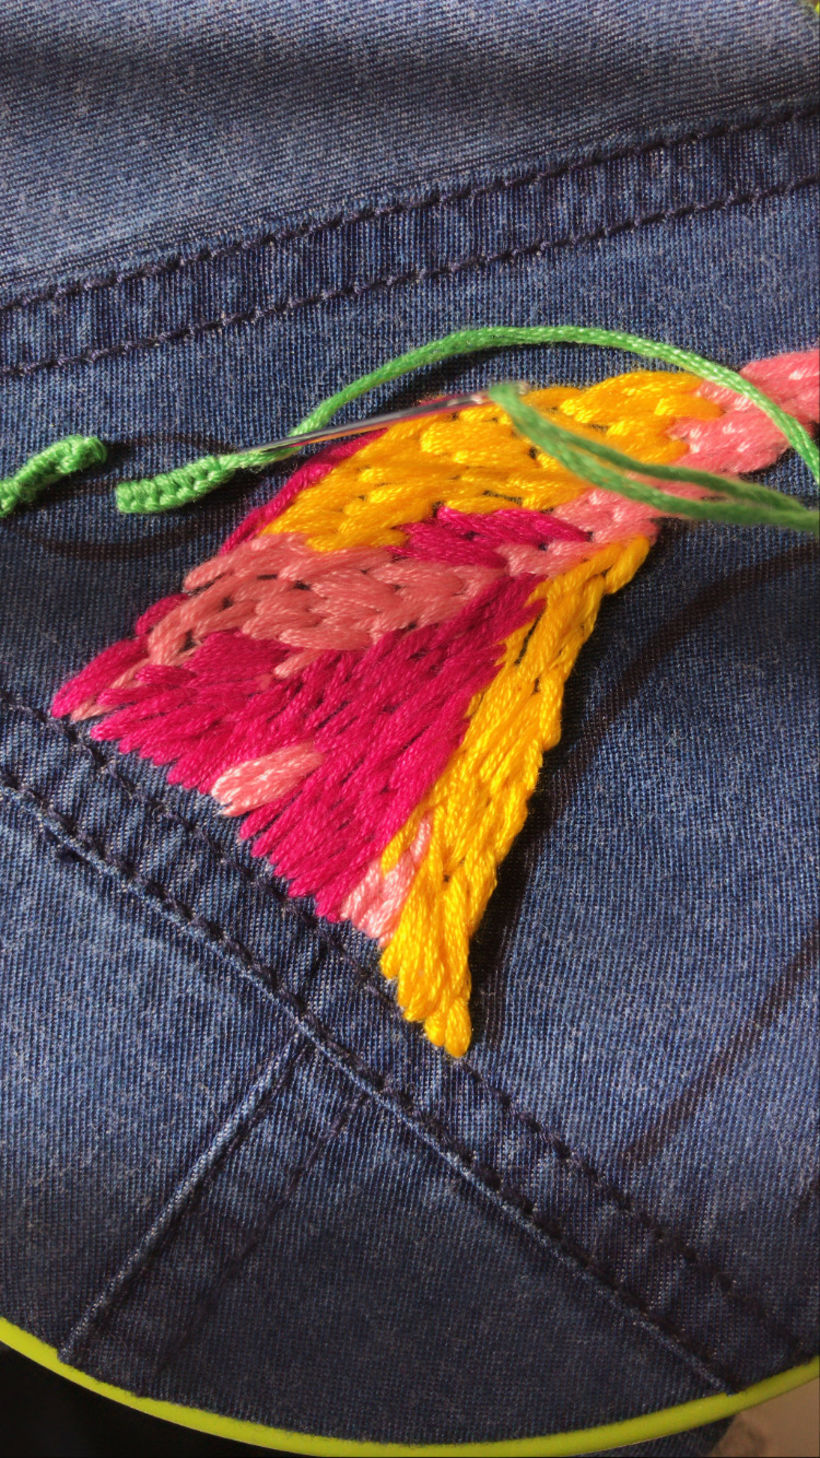 The Stitch Revolution course — Nature on a jacket 2